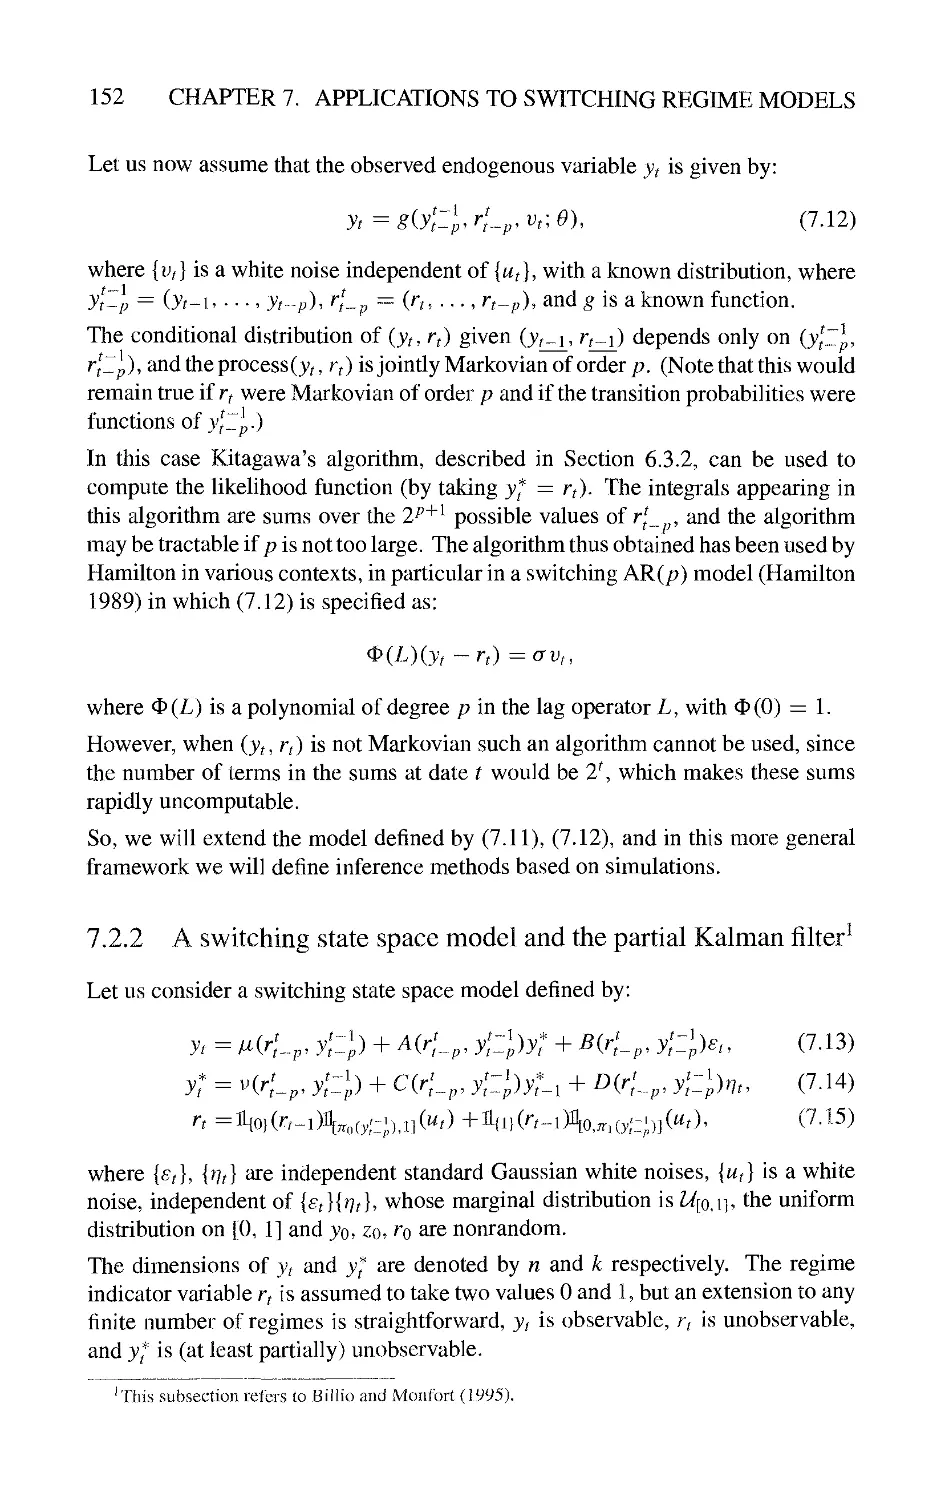 7.2.2 A switching state space model and the partial Kalman filter